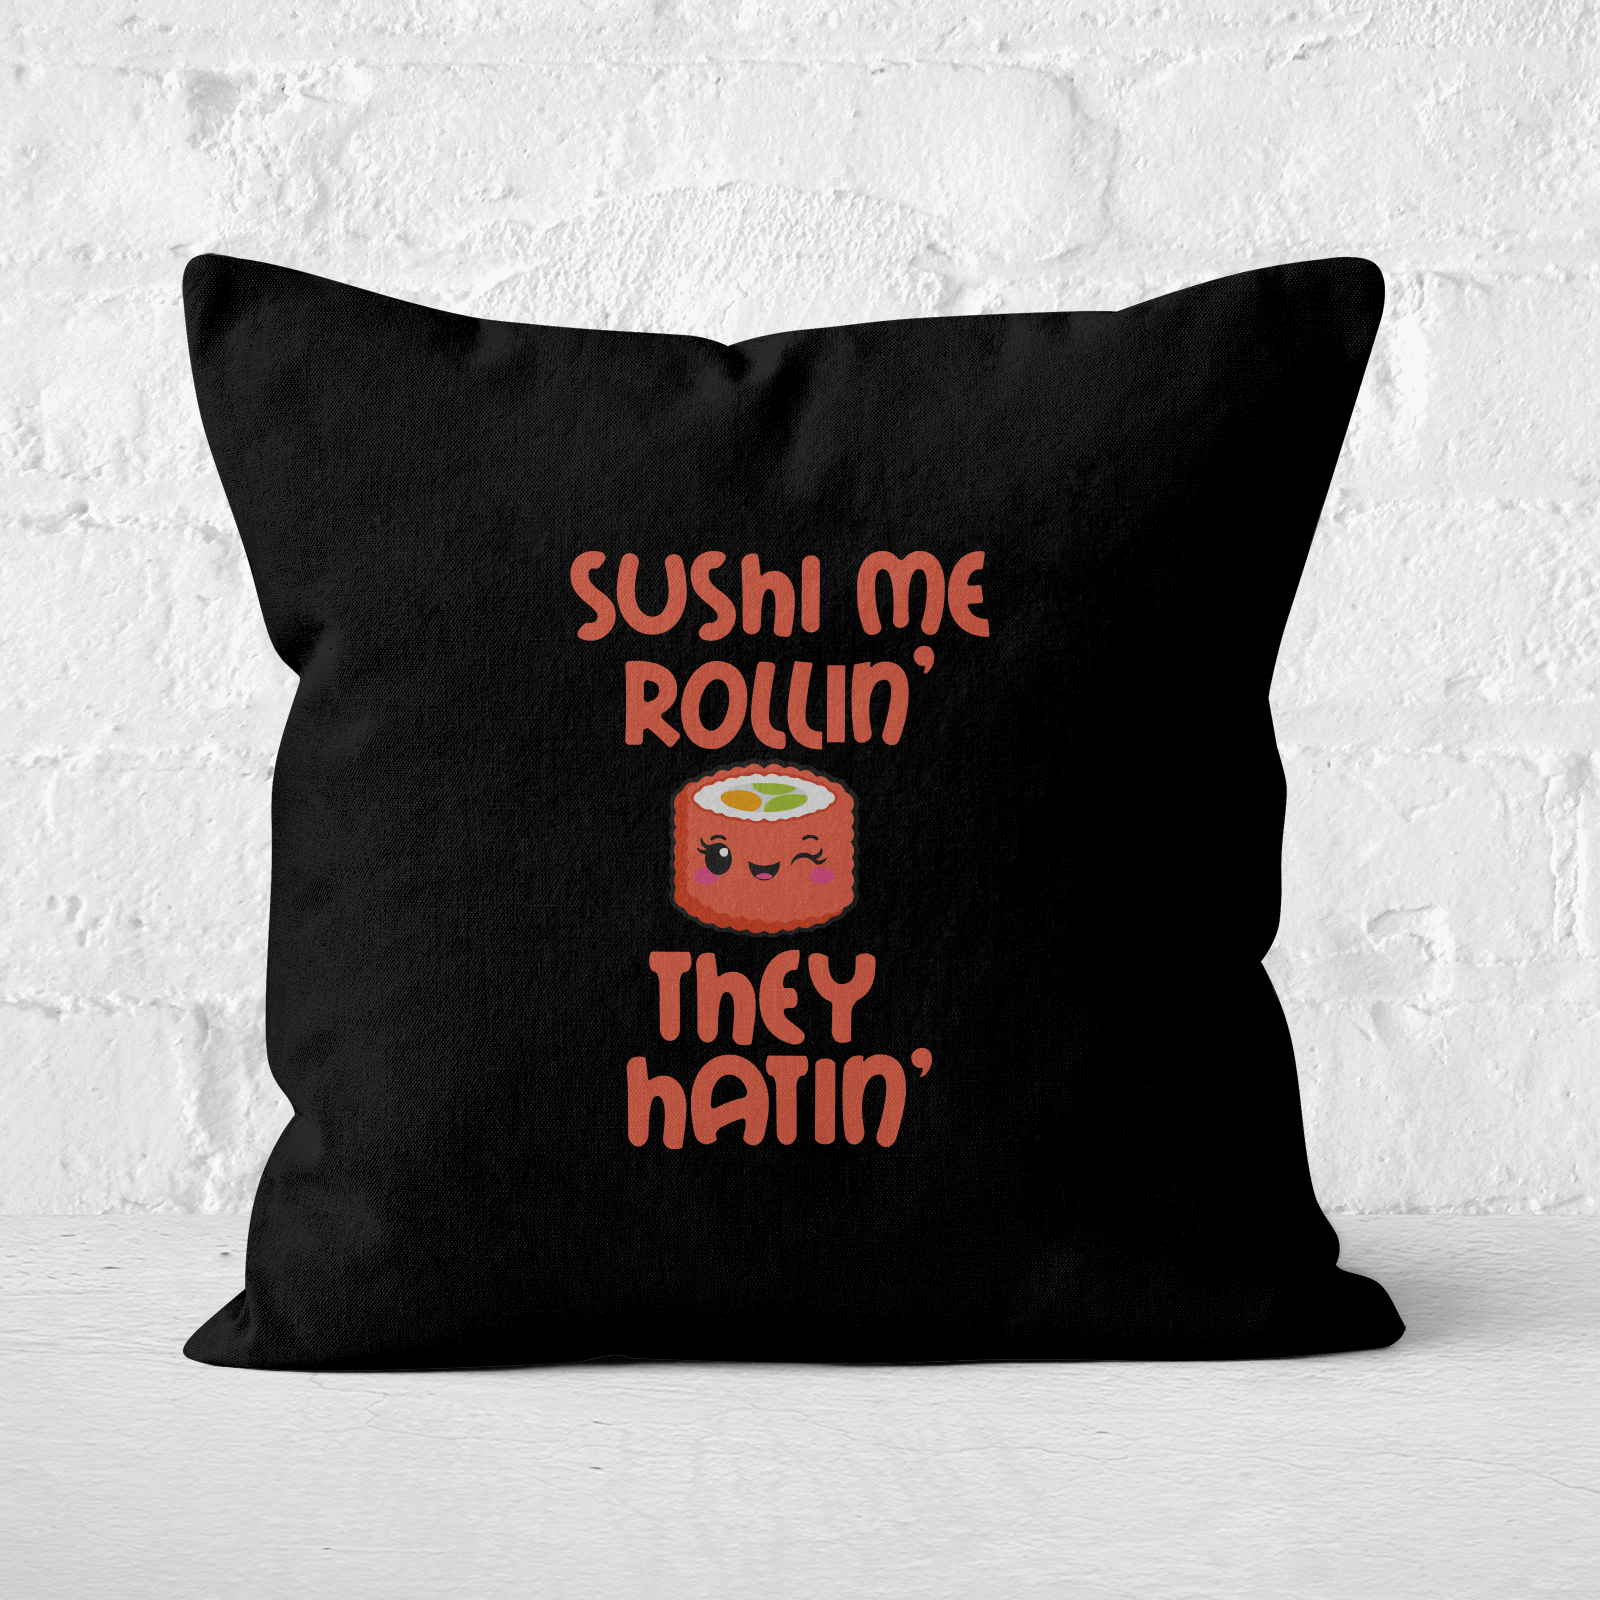 Sushi Me Rollin' Square Cushion - 60x60cm - Soft Touch